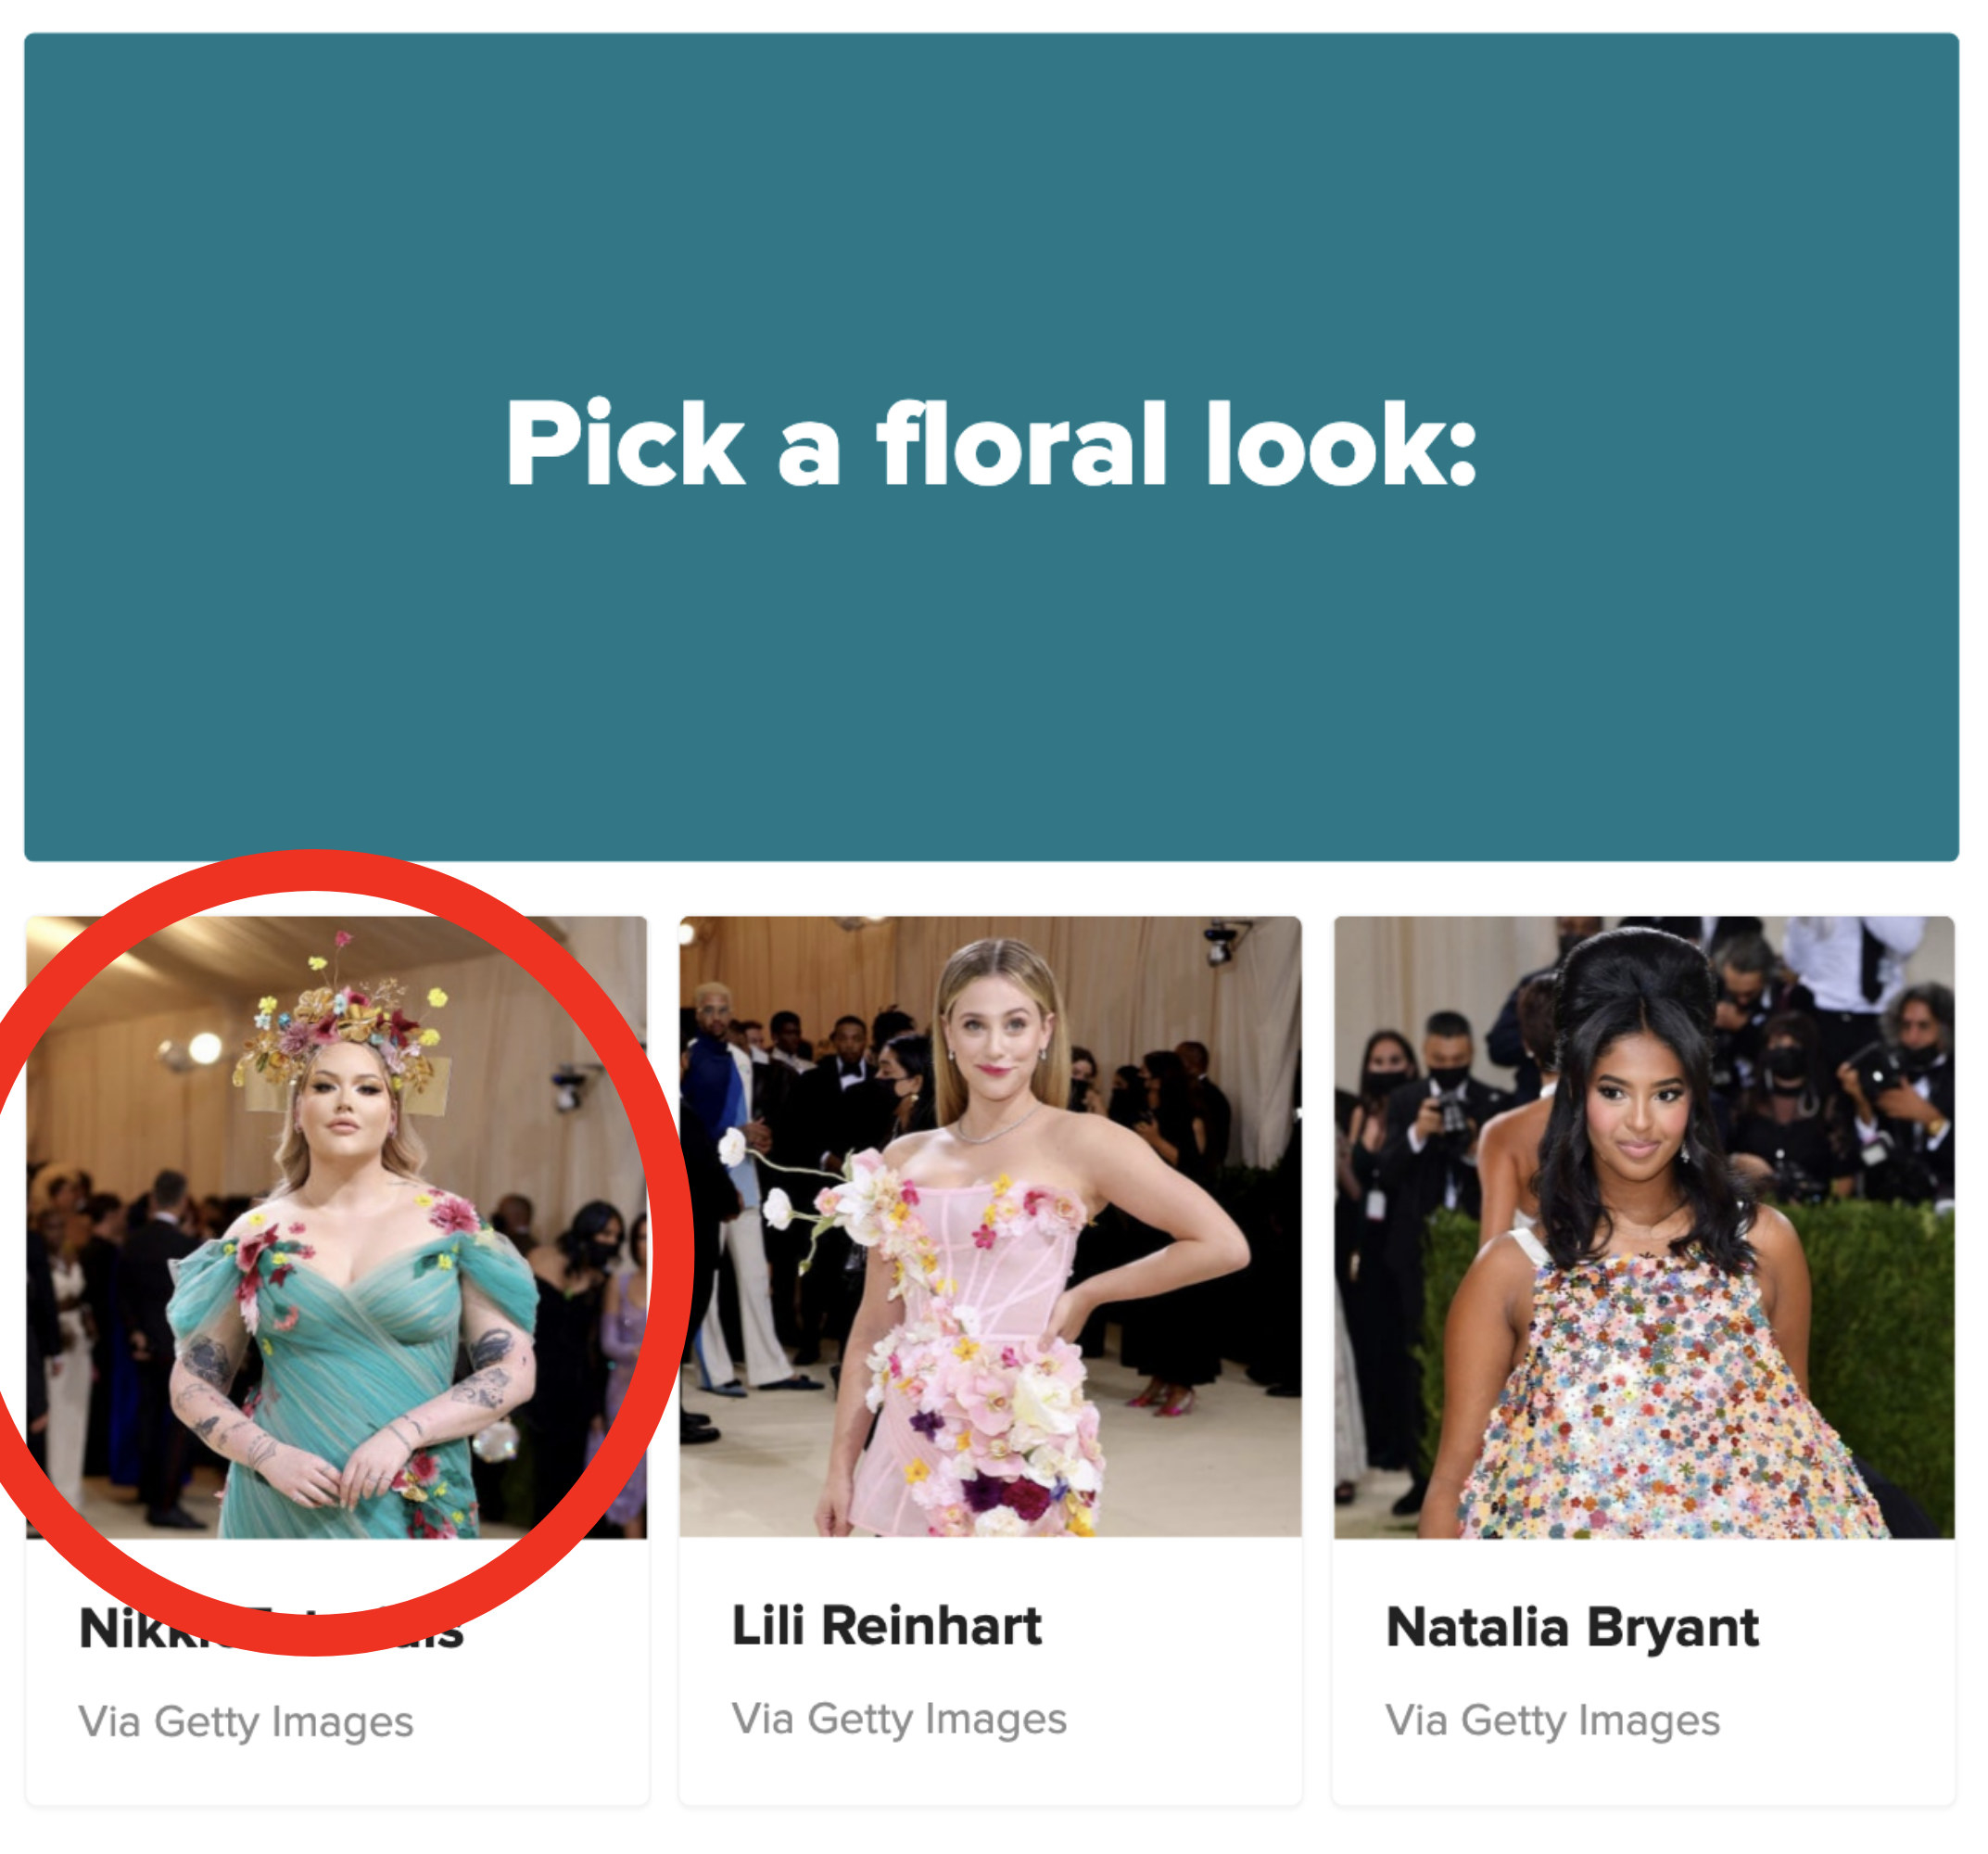 three different famous women in floral outfits with the first one circled